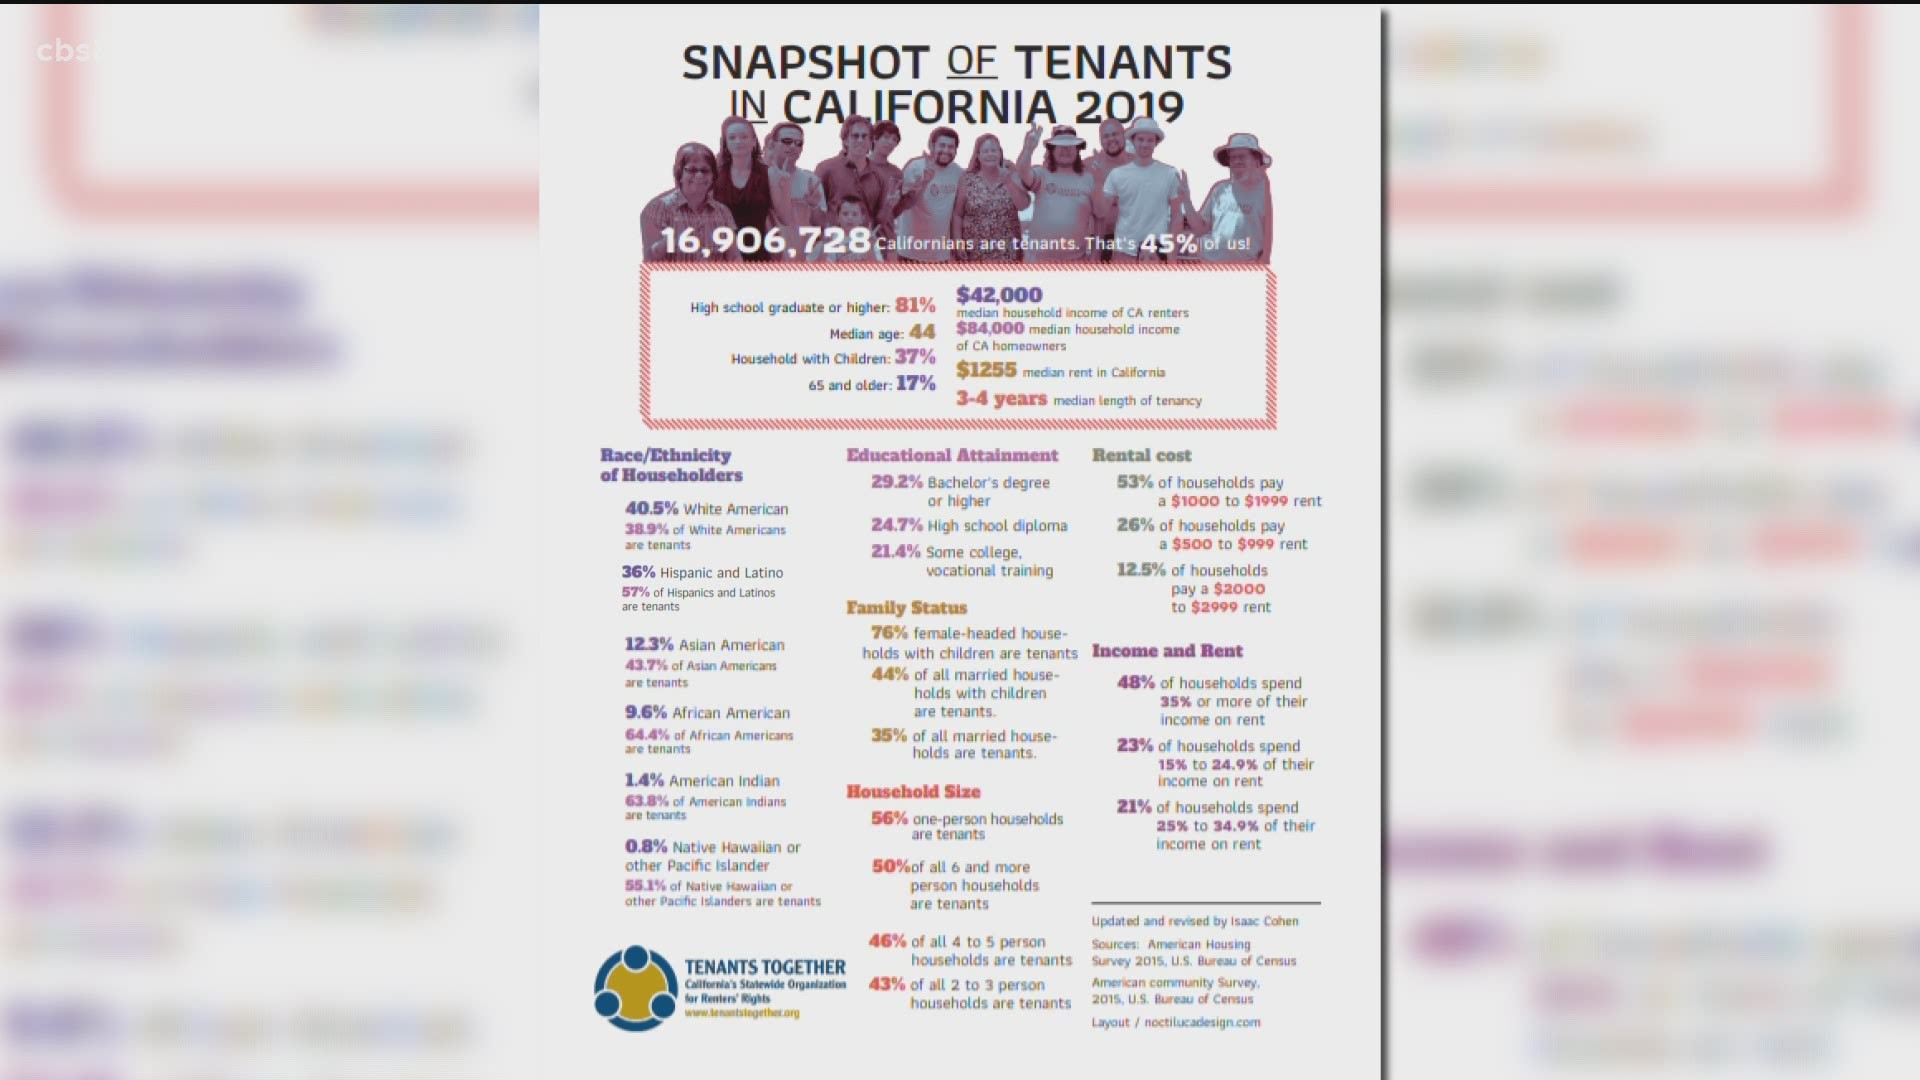 According to TenantsTogether.org, Latinos make up 57% of all renters in California but only 35% have applied for rental assistance across the state.